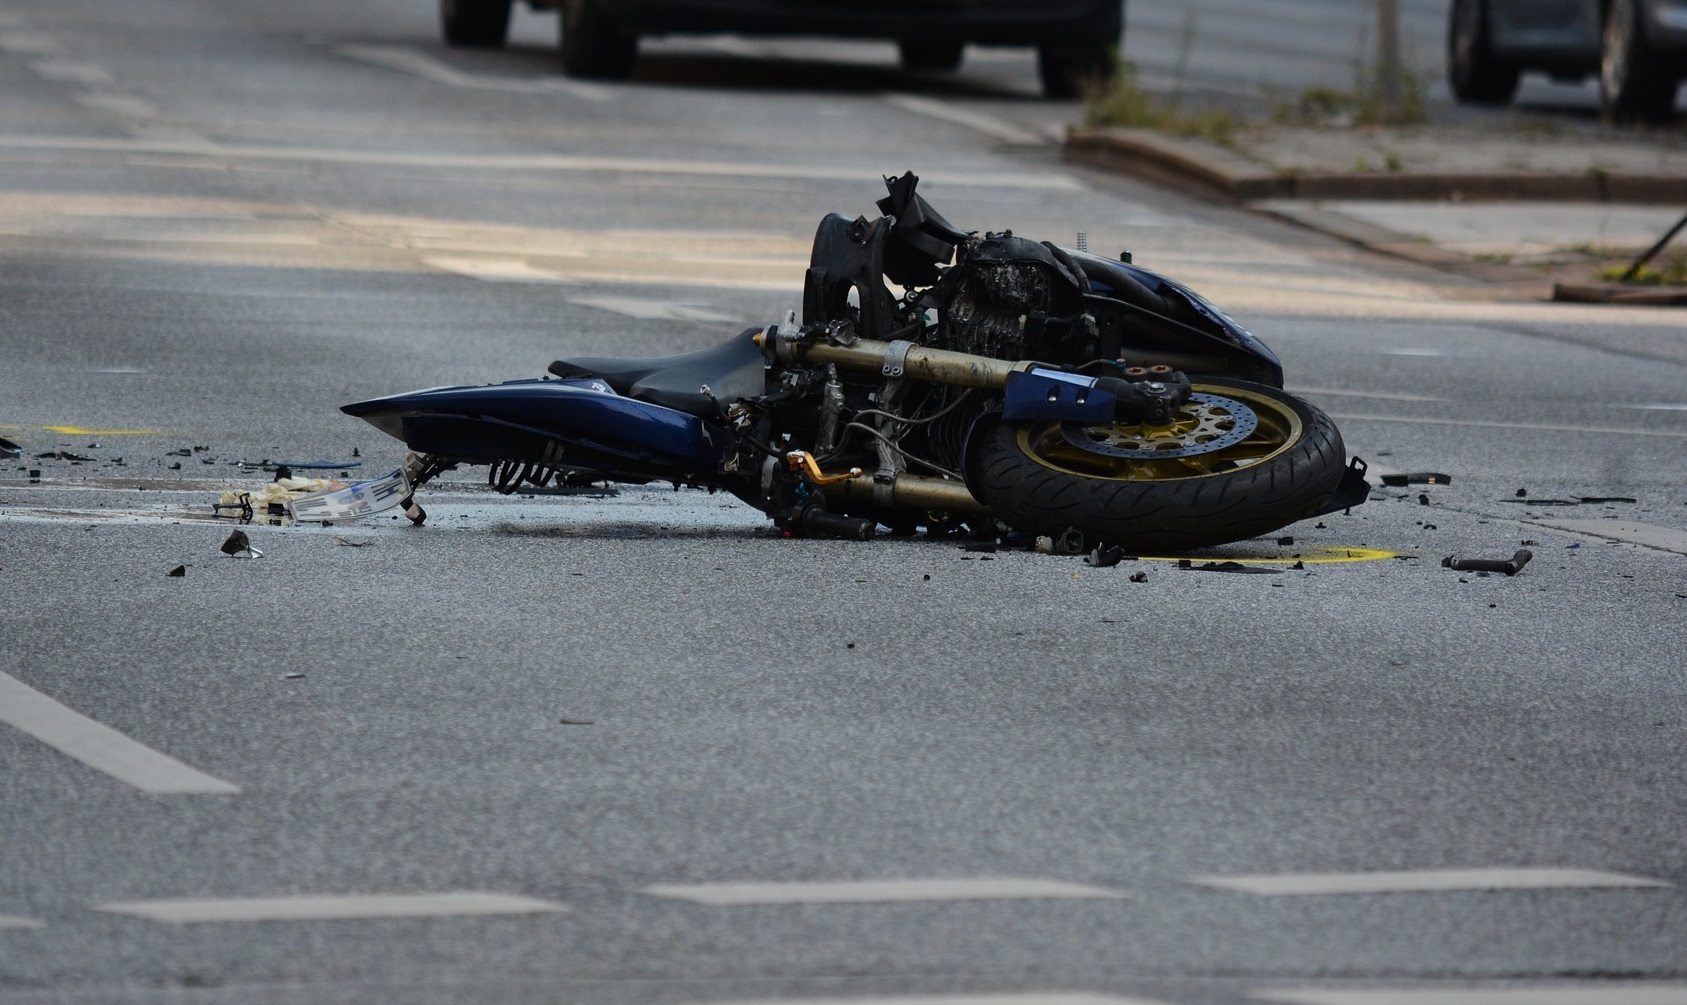 Important Advice From A Motorcycle Accident Attorney